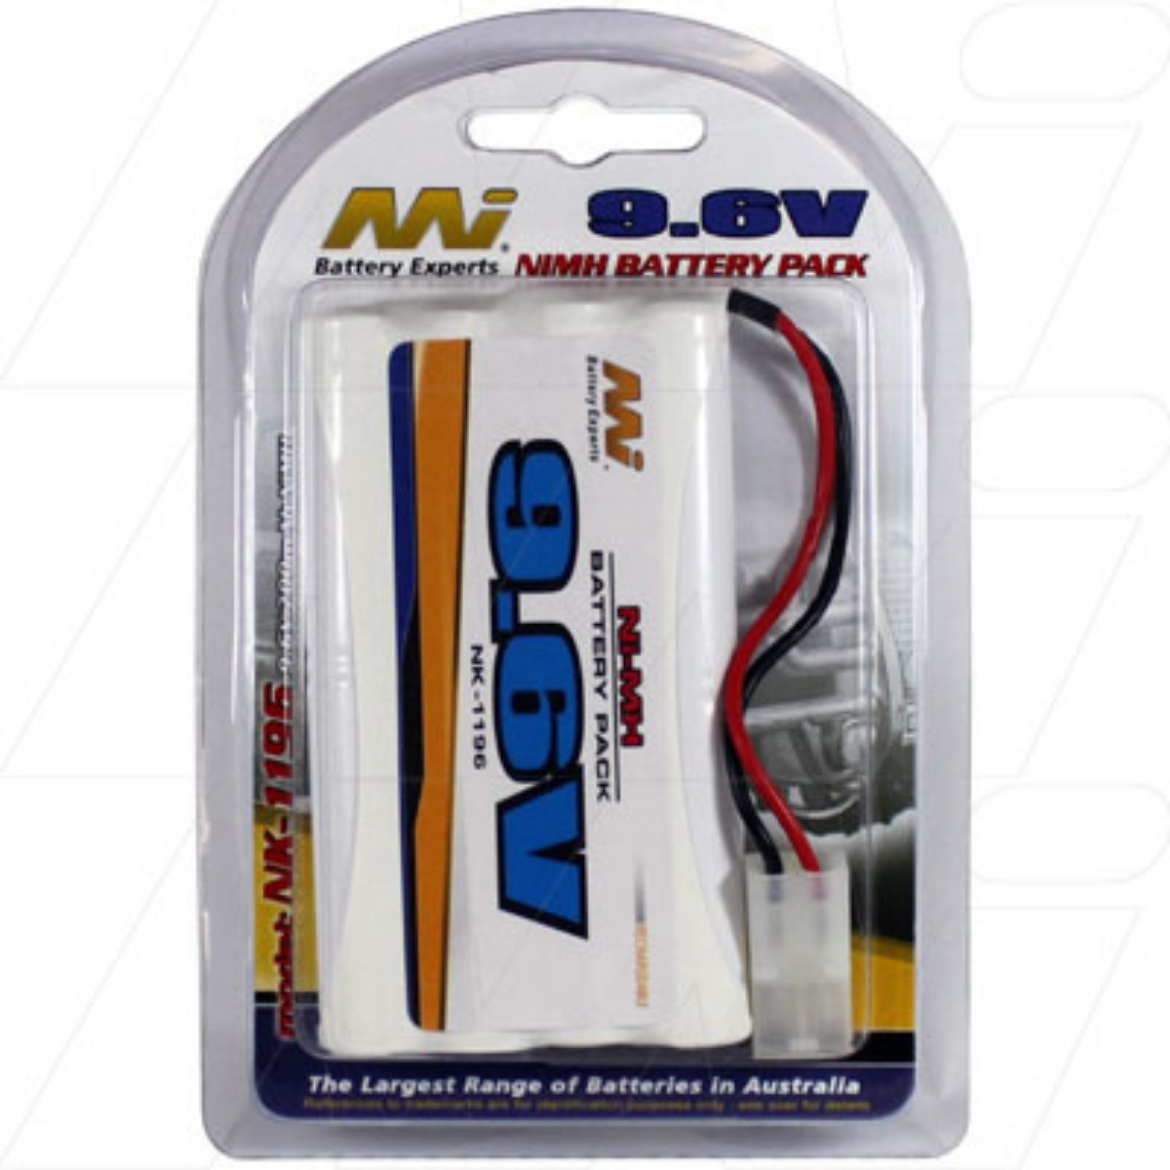 Picture of R/C 9.6V HOBBY BATTERY PACK - 700MAH - WITH TAMIYA CONNECTOR